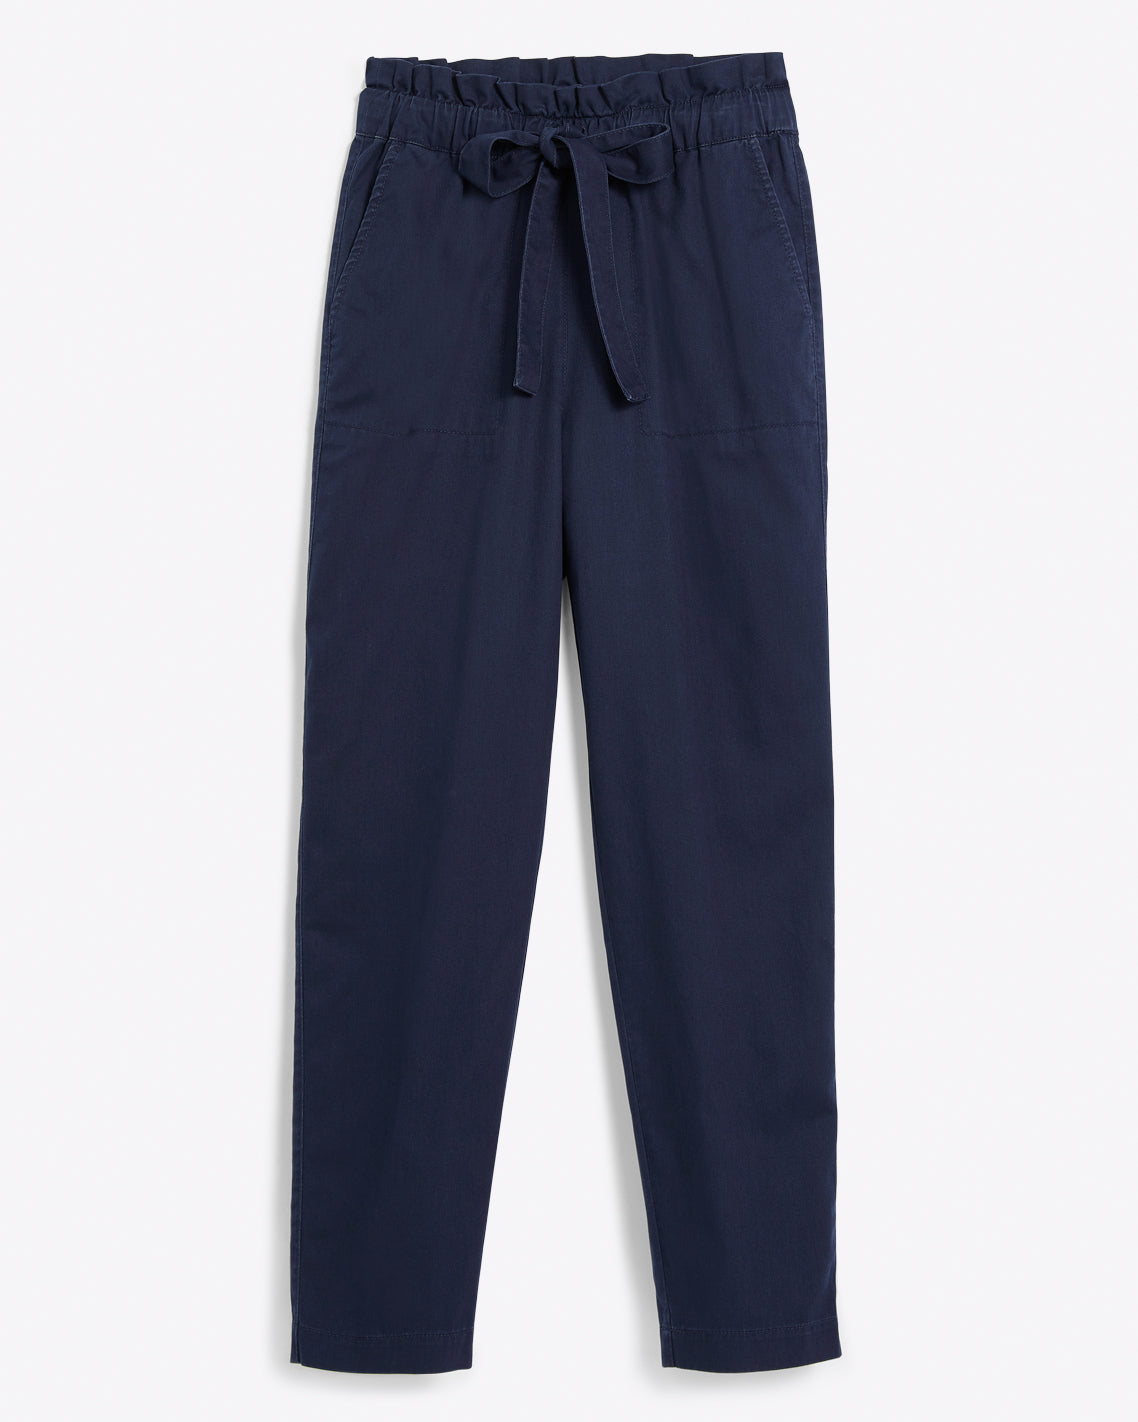 Paper Bag Pant in Washed Twill